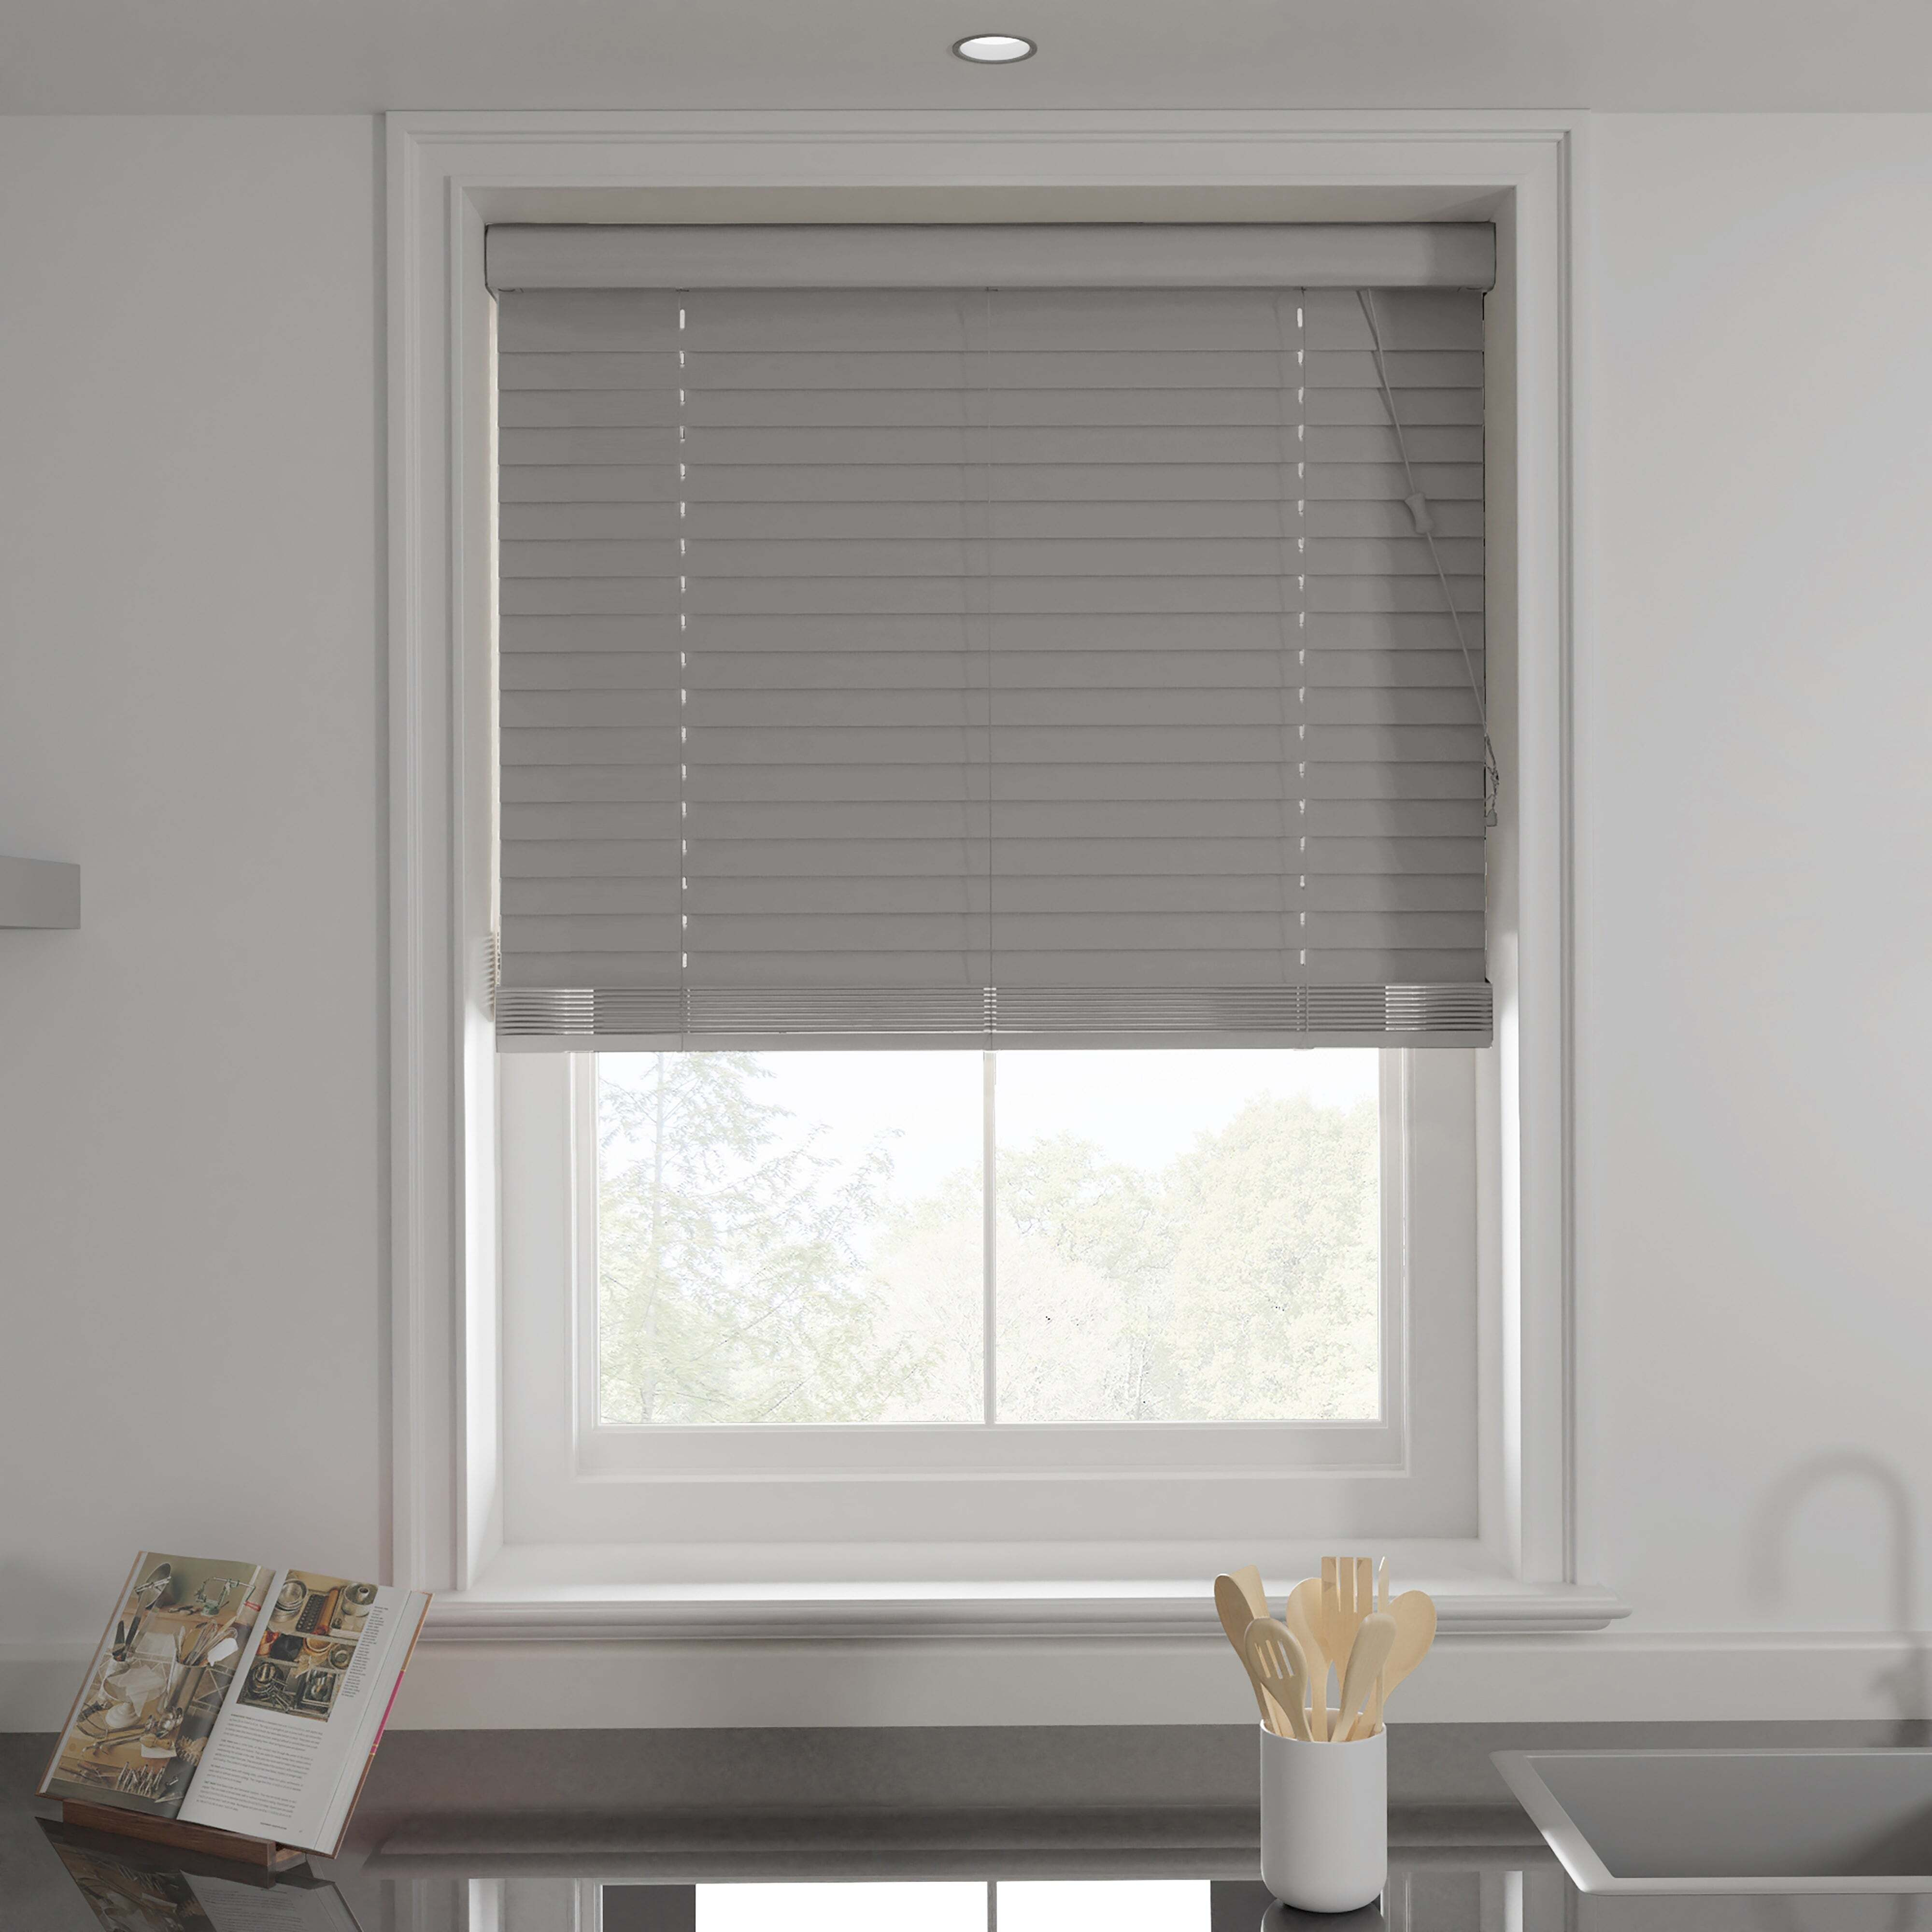 Swish Grey 50mm Made To Order Faux Wood Blinds, Size:85cm x 120cm Grey